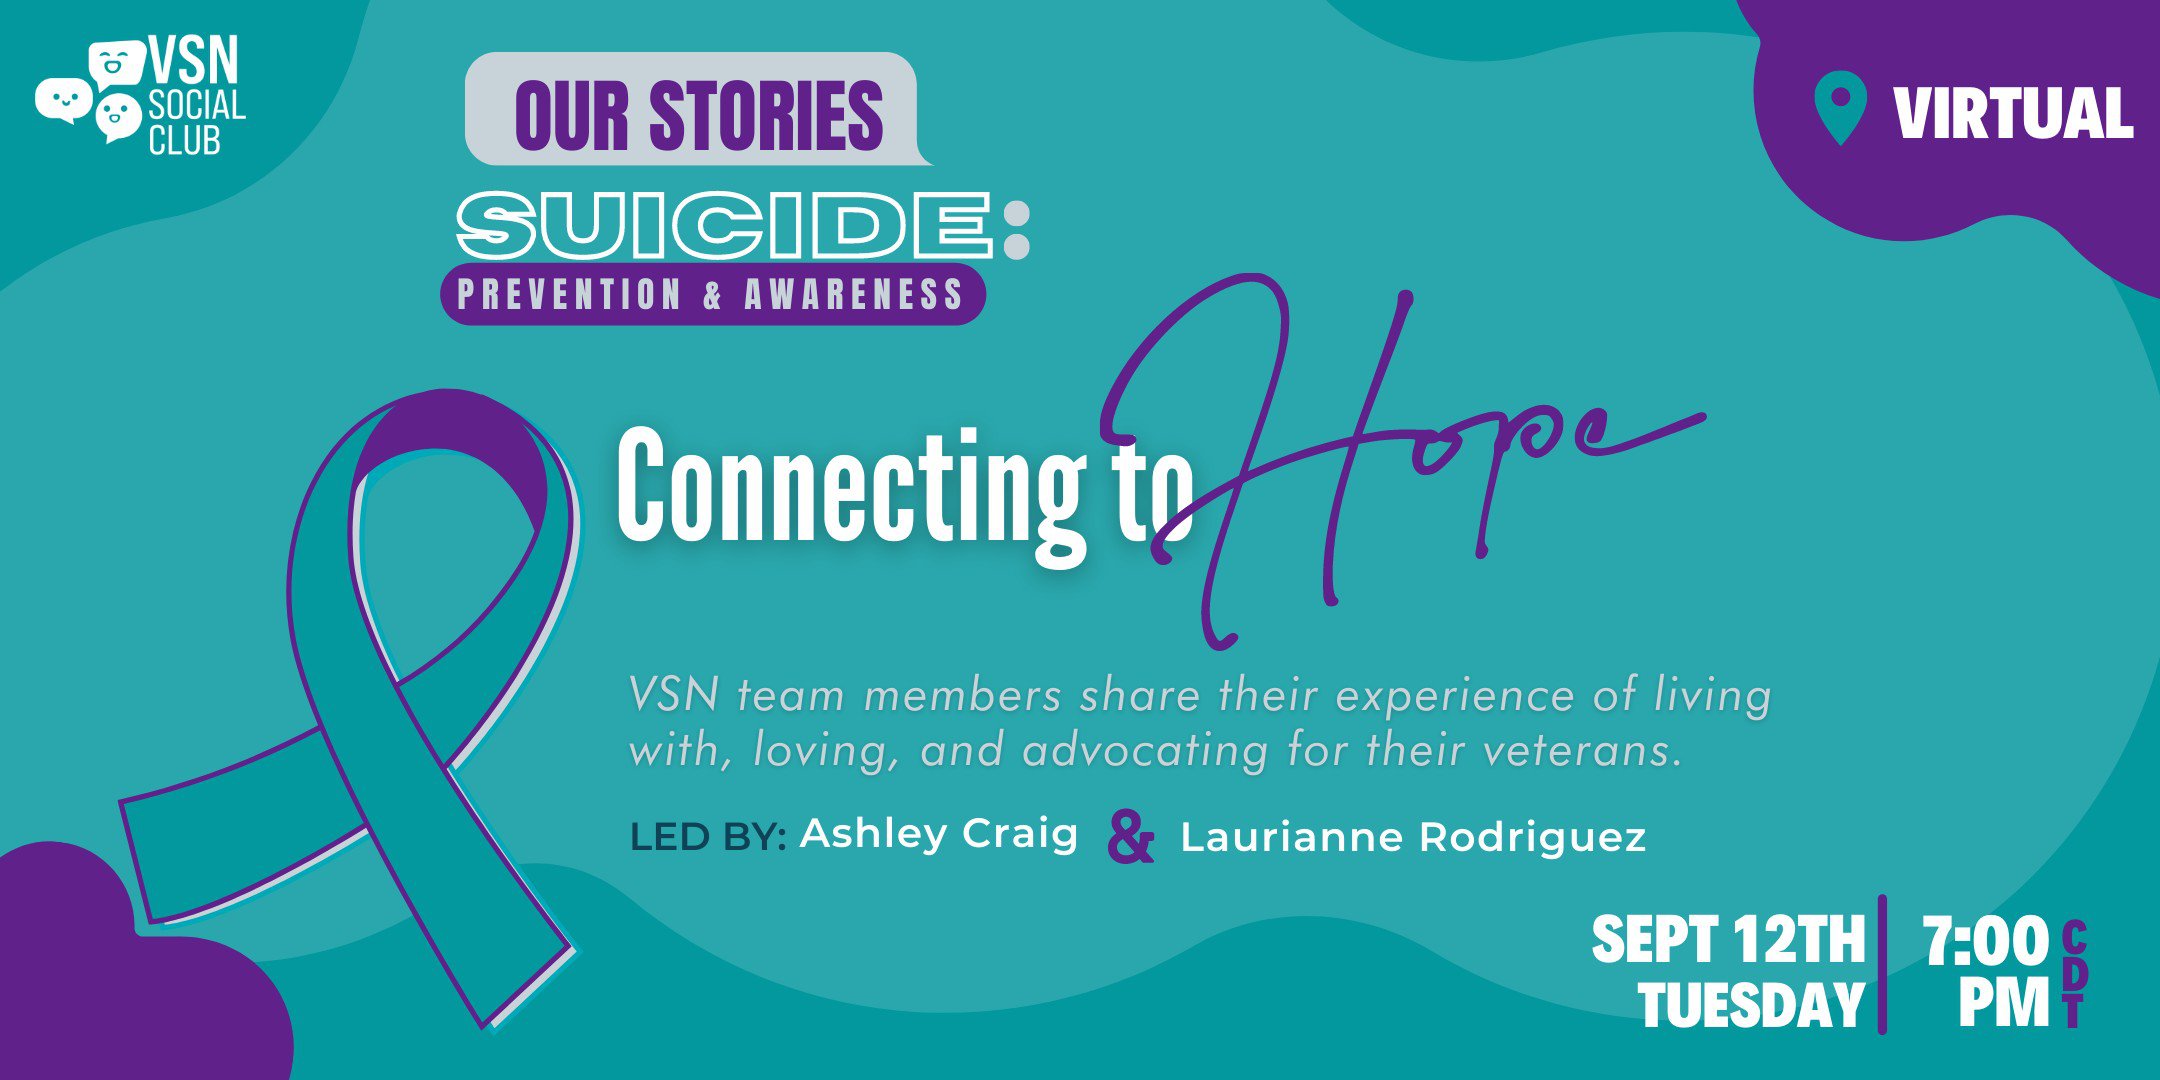 Our Stories: Suicide Prevention and Awareness